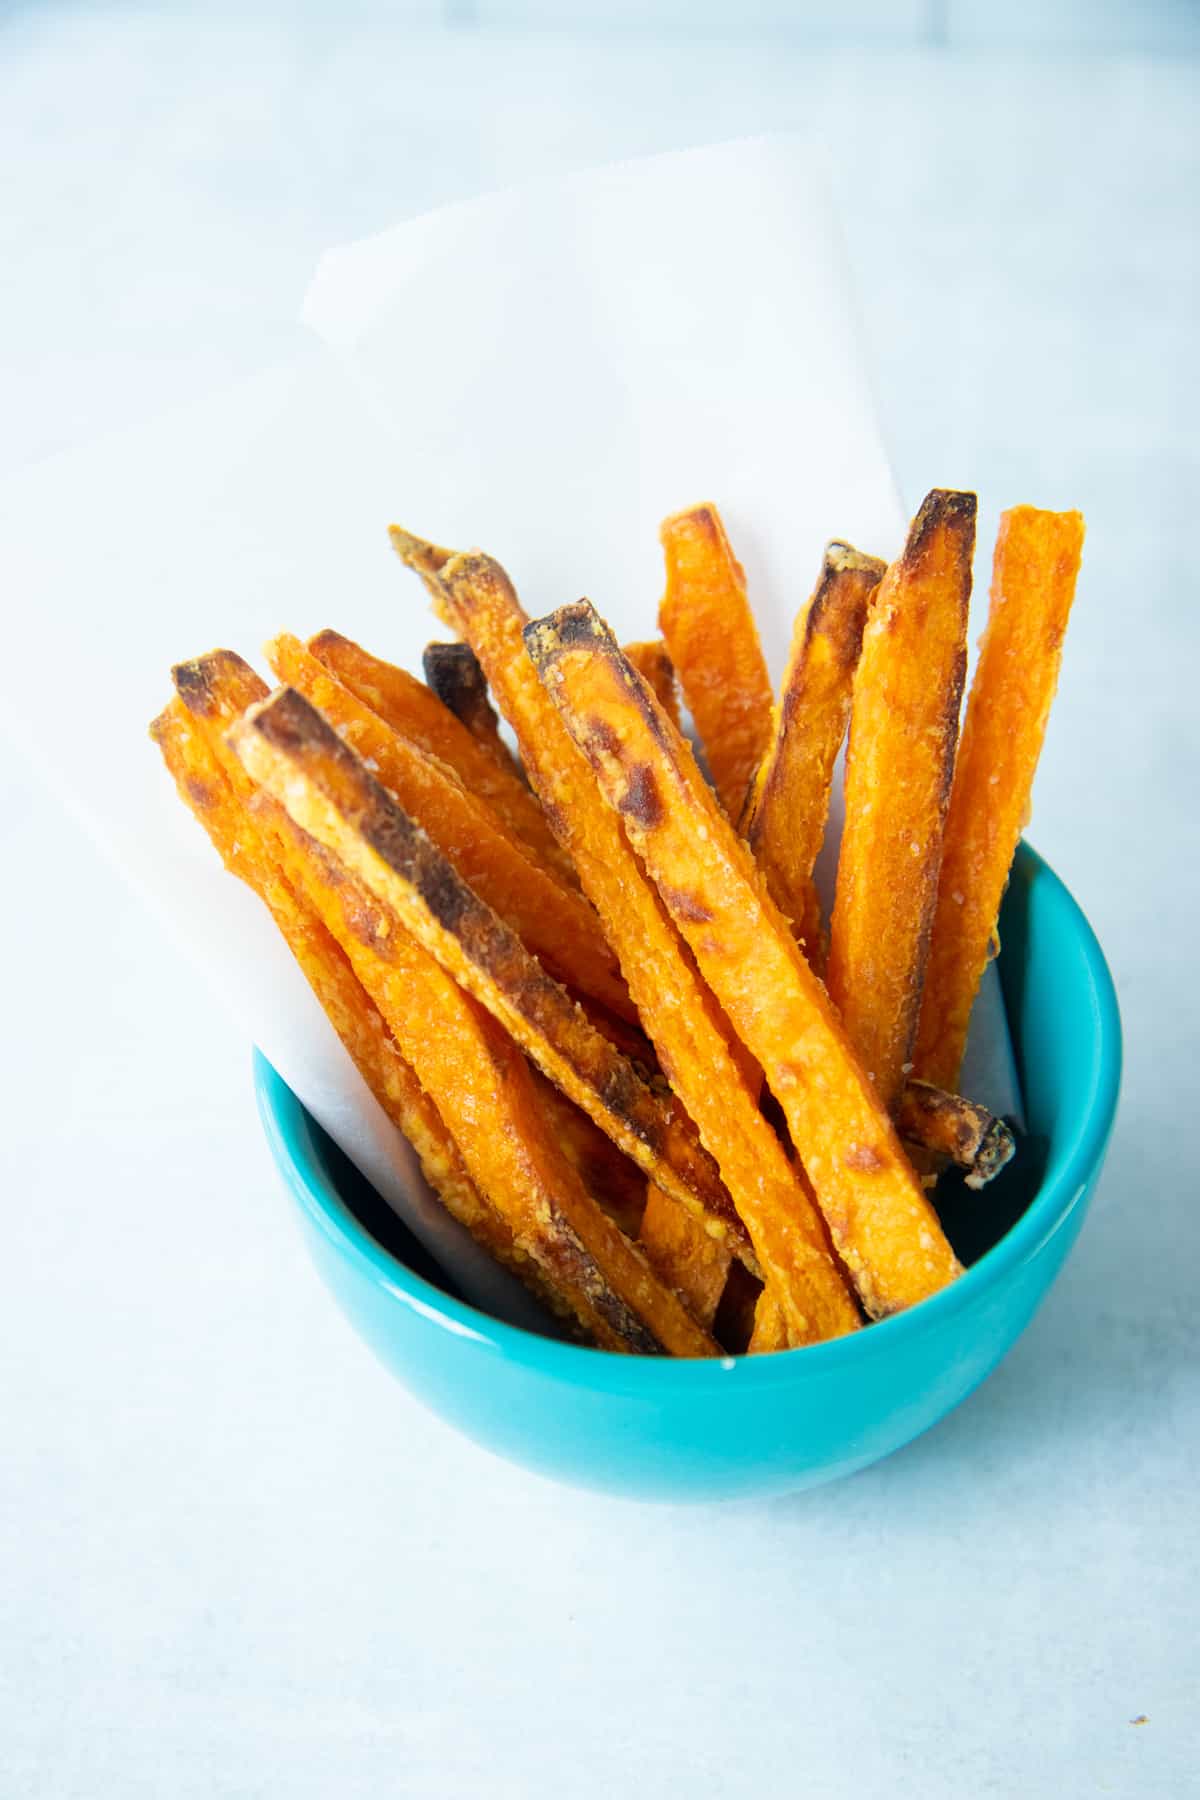 Crispy baked sweet potato fries in a small blue bowl.